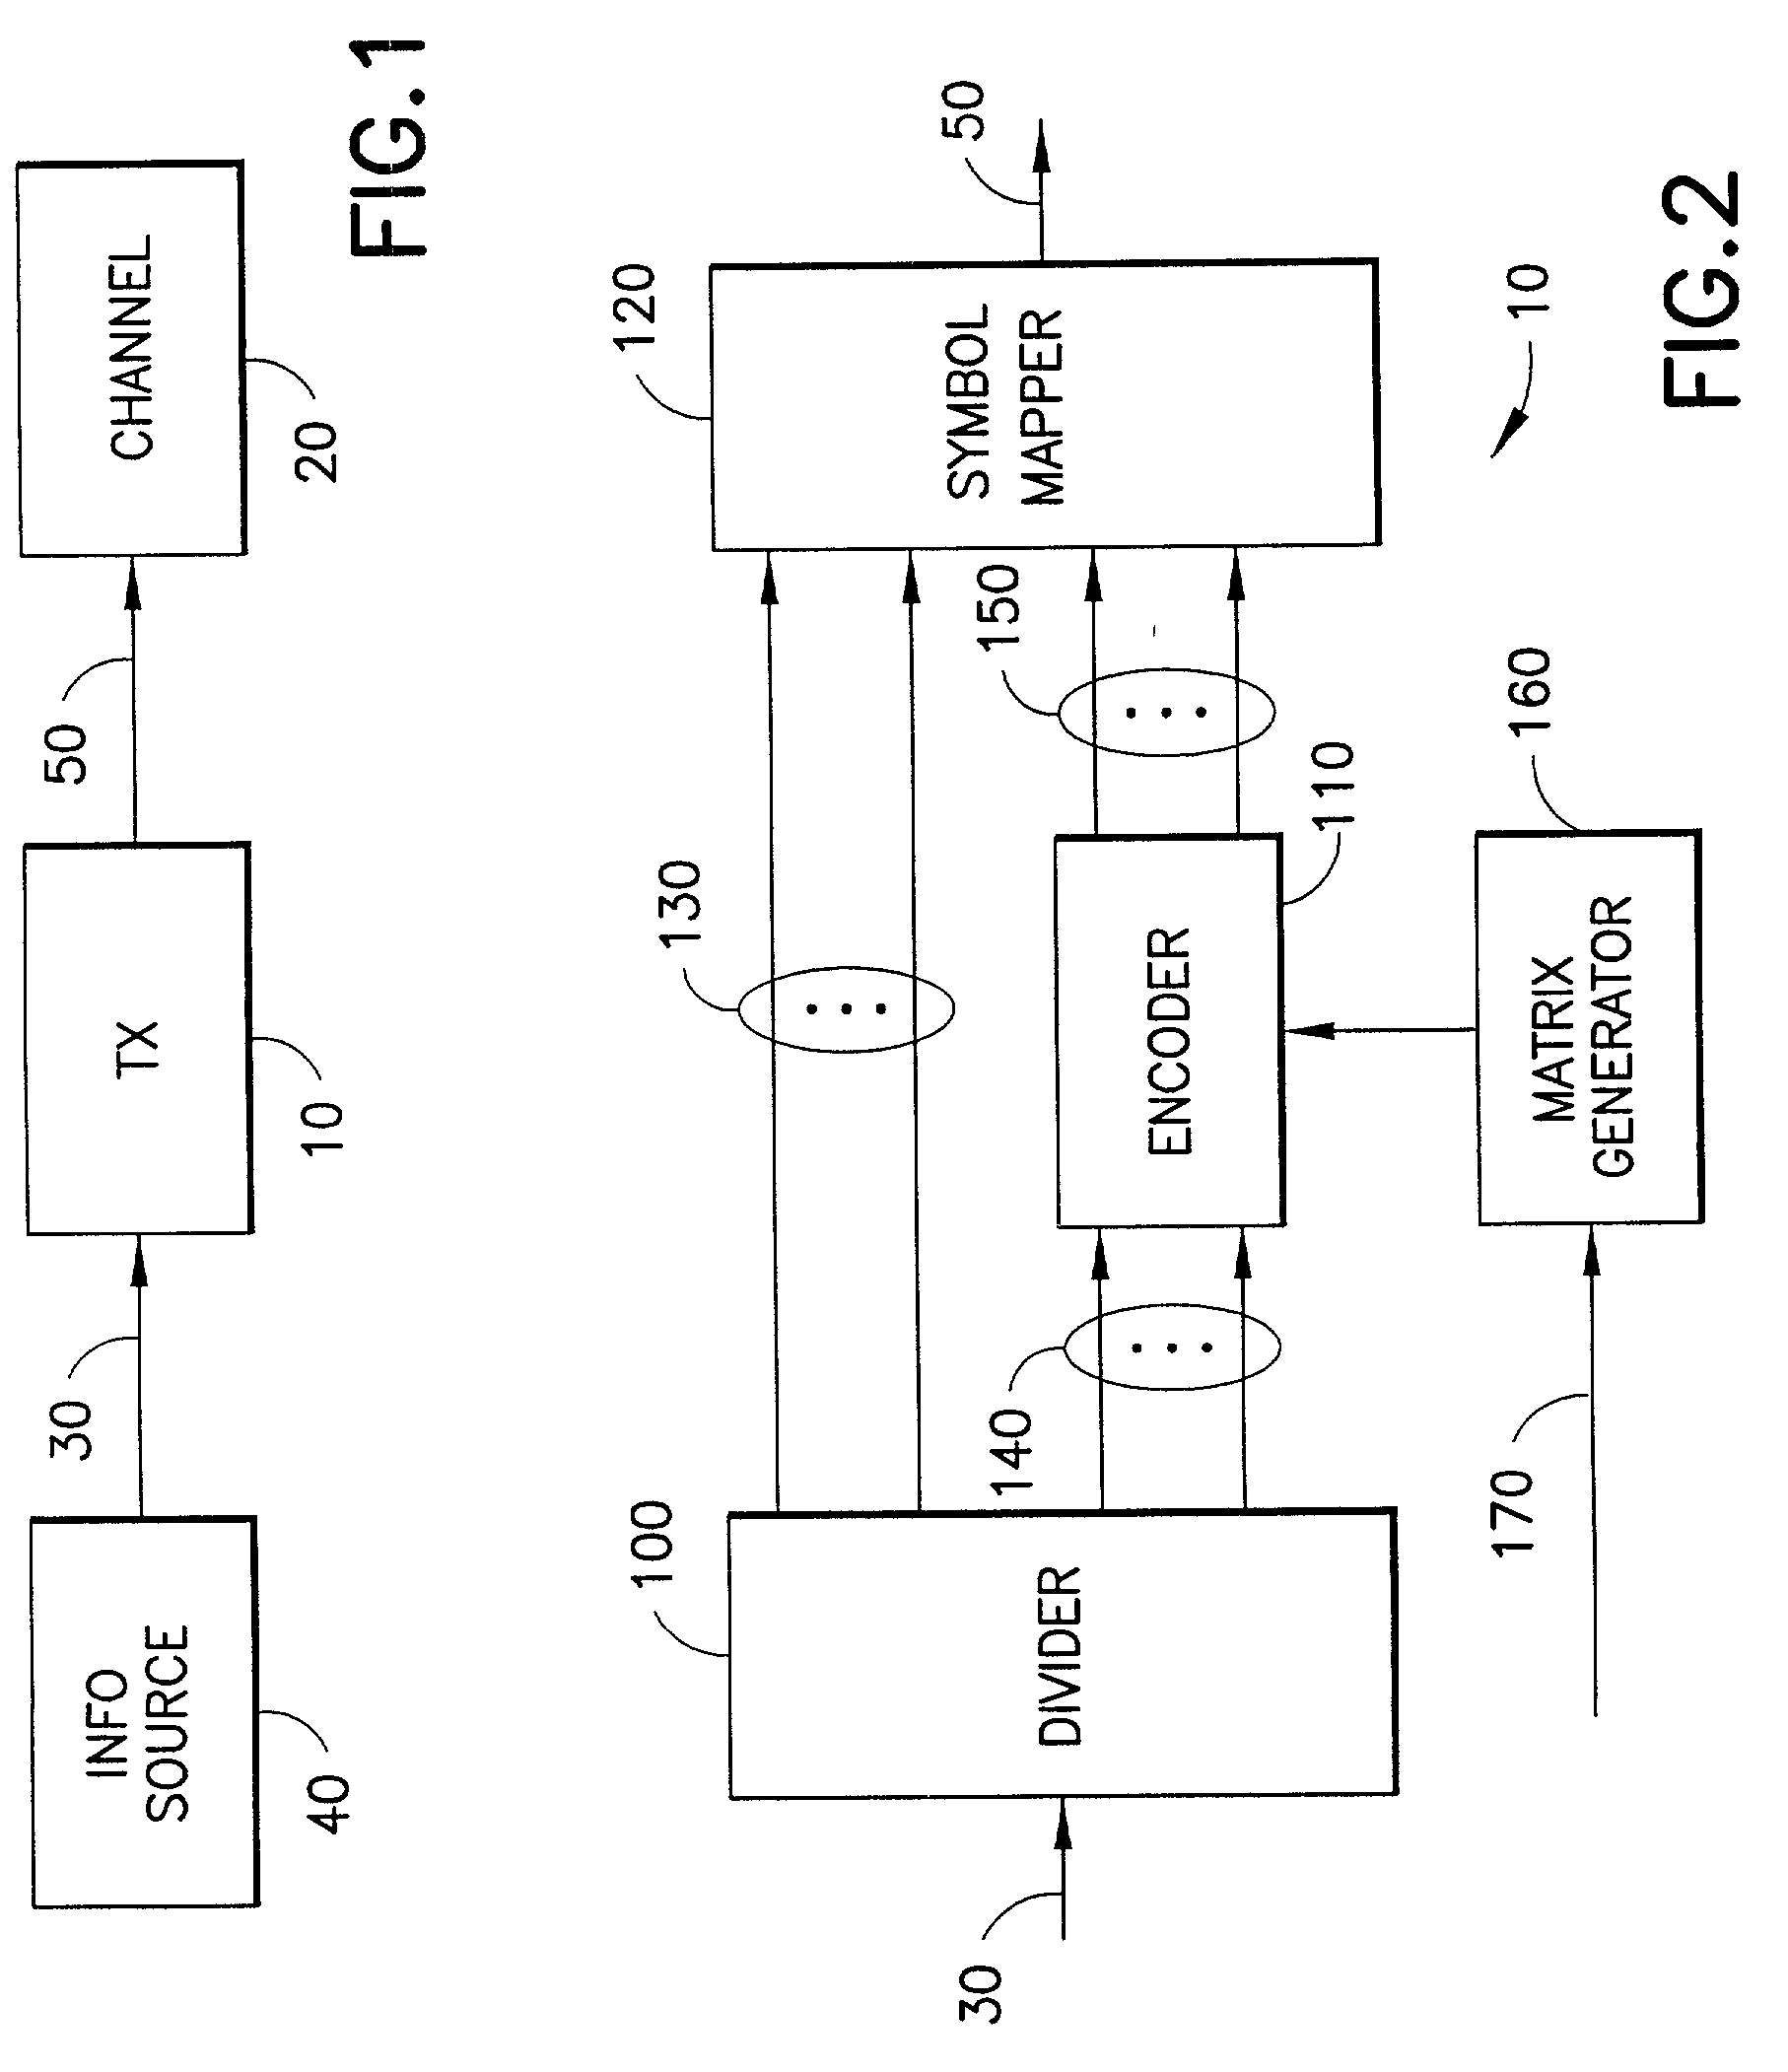 Method and apparatus for low density parity check encoding of data